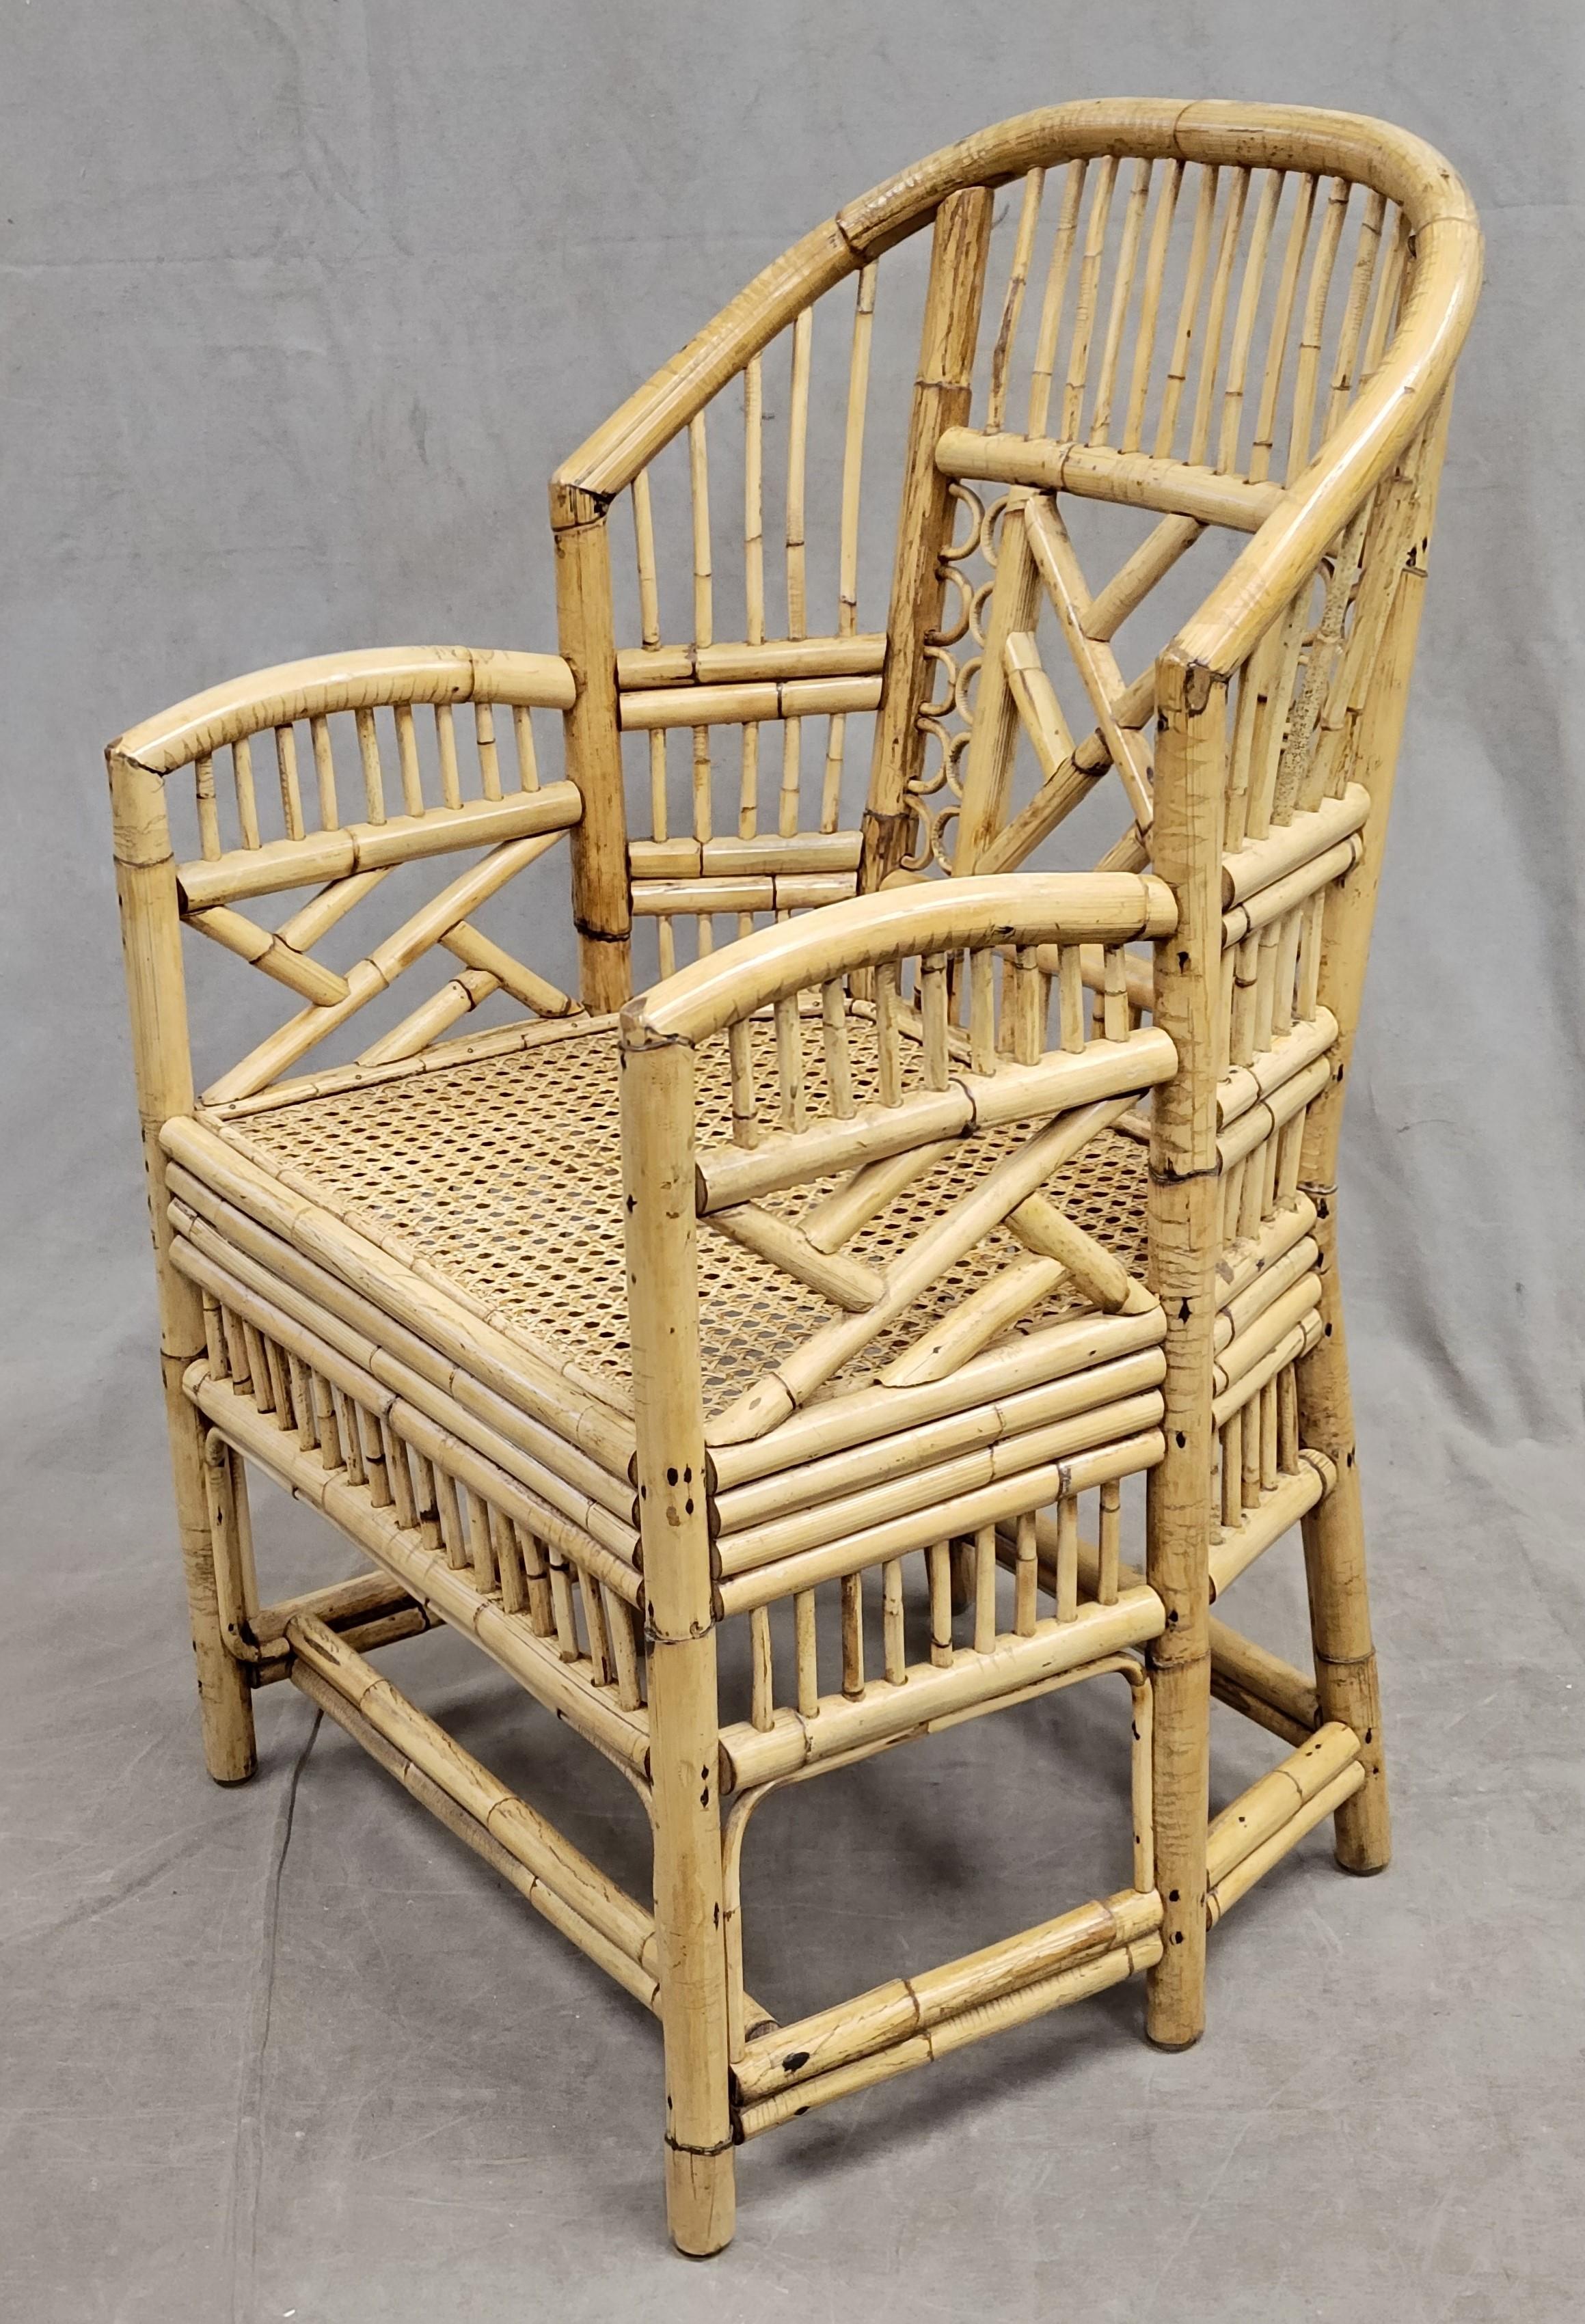 Hand-Crafted Vintage Brighton Pavilion Faux Bamboo Chairs With Kravet Cushions, Set of 4